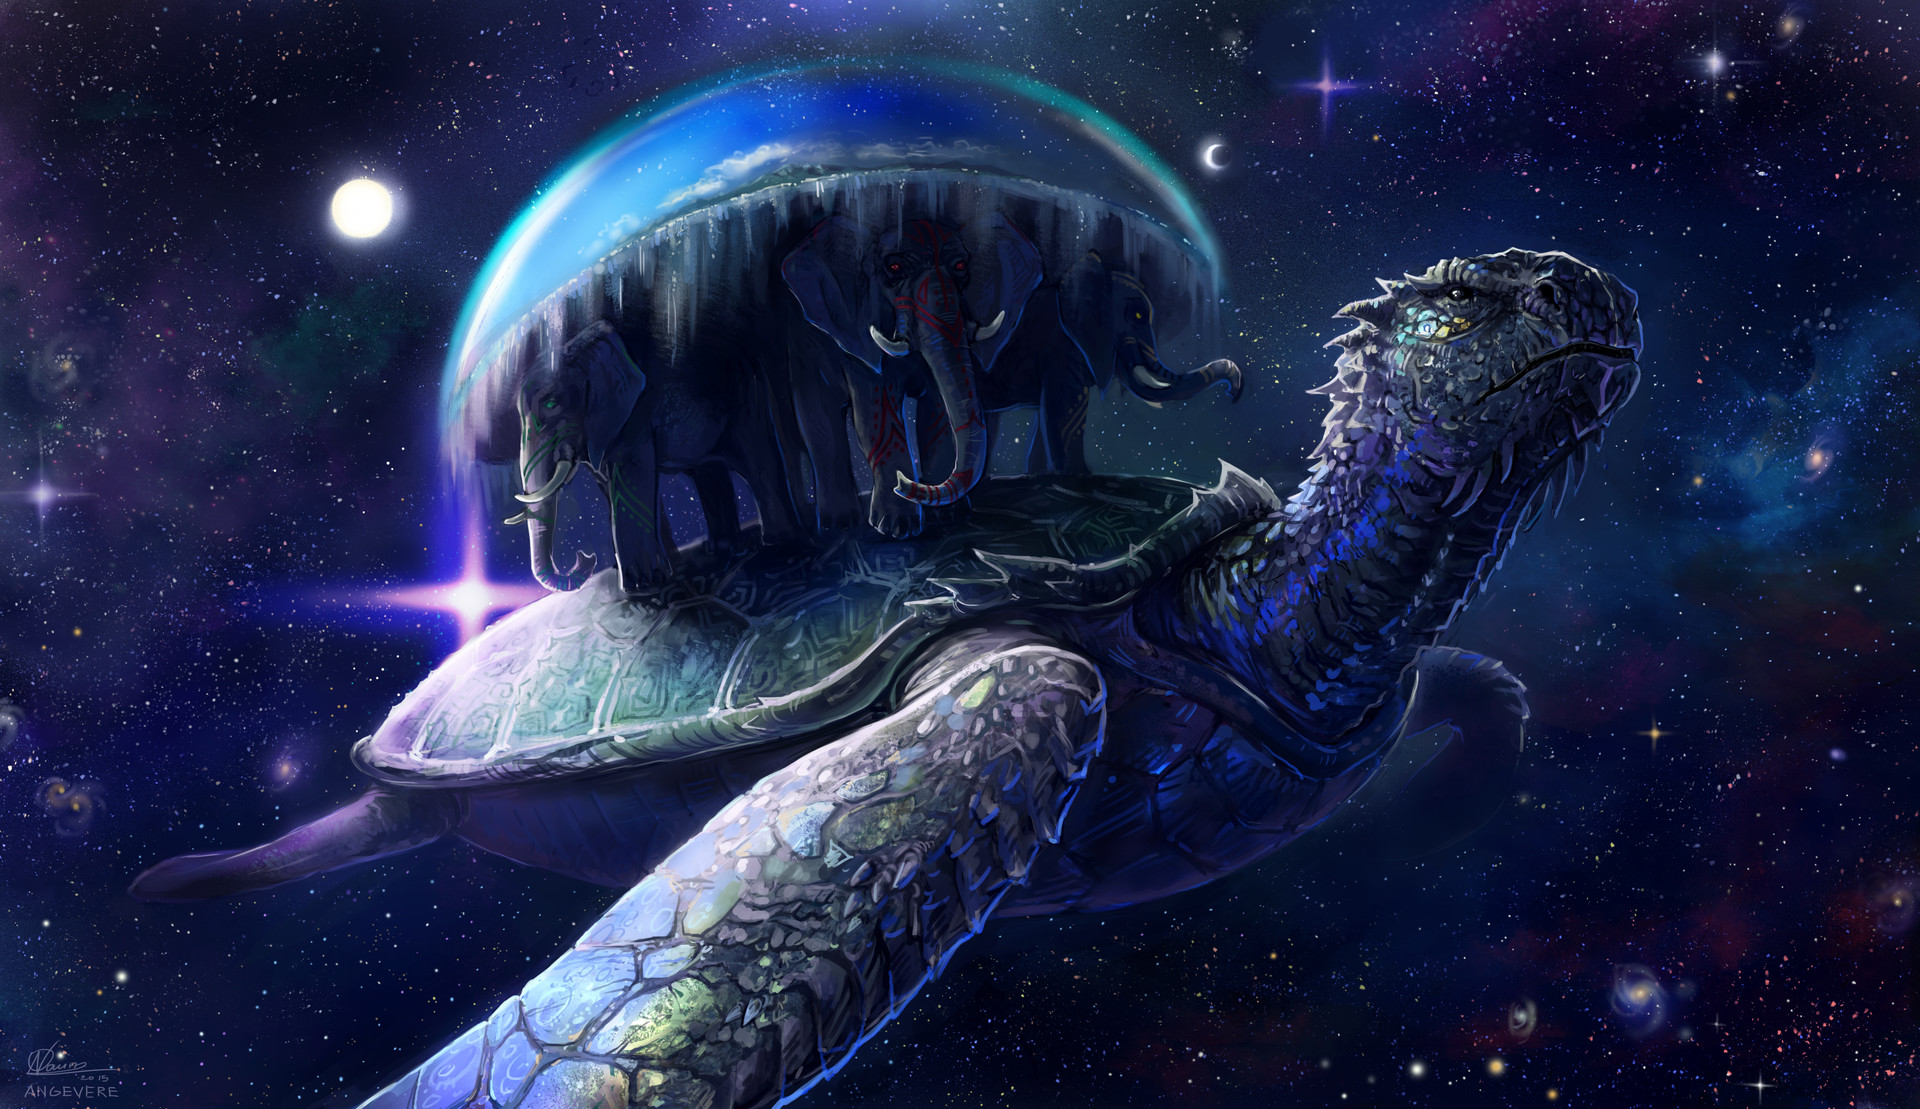 R Imaginaryturtleworlds The Great A Tuin By Angevere Ona